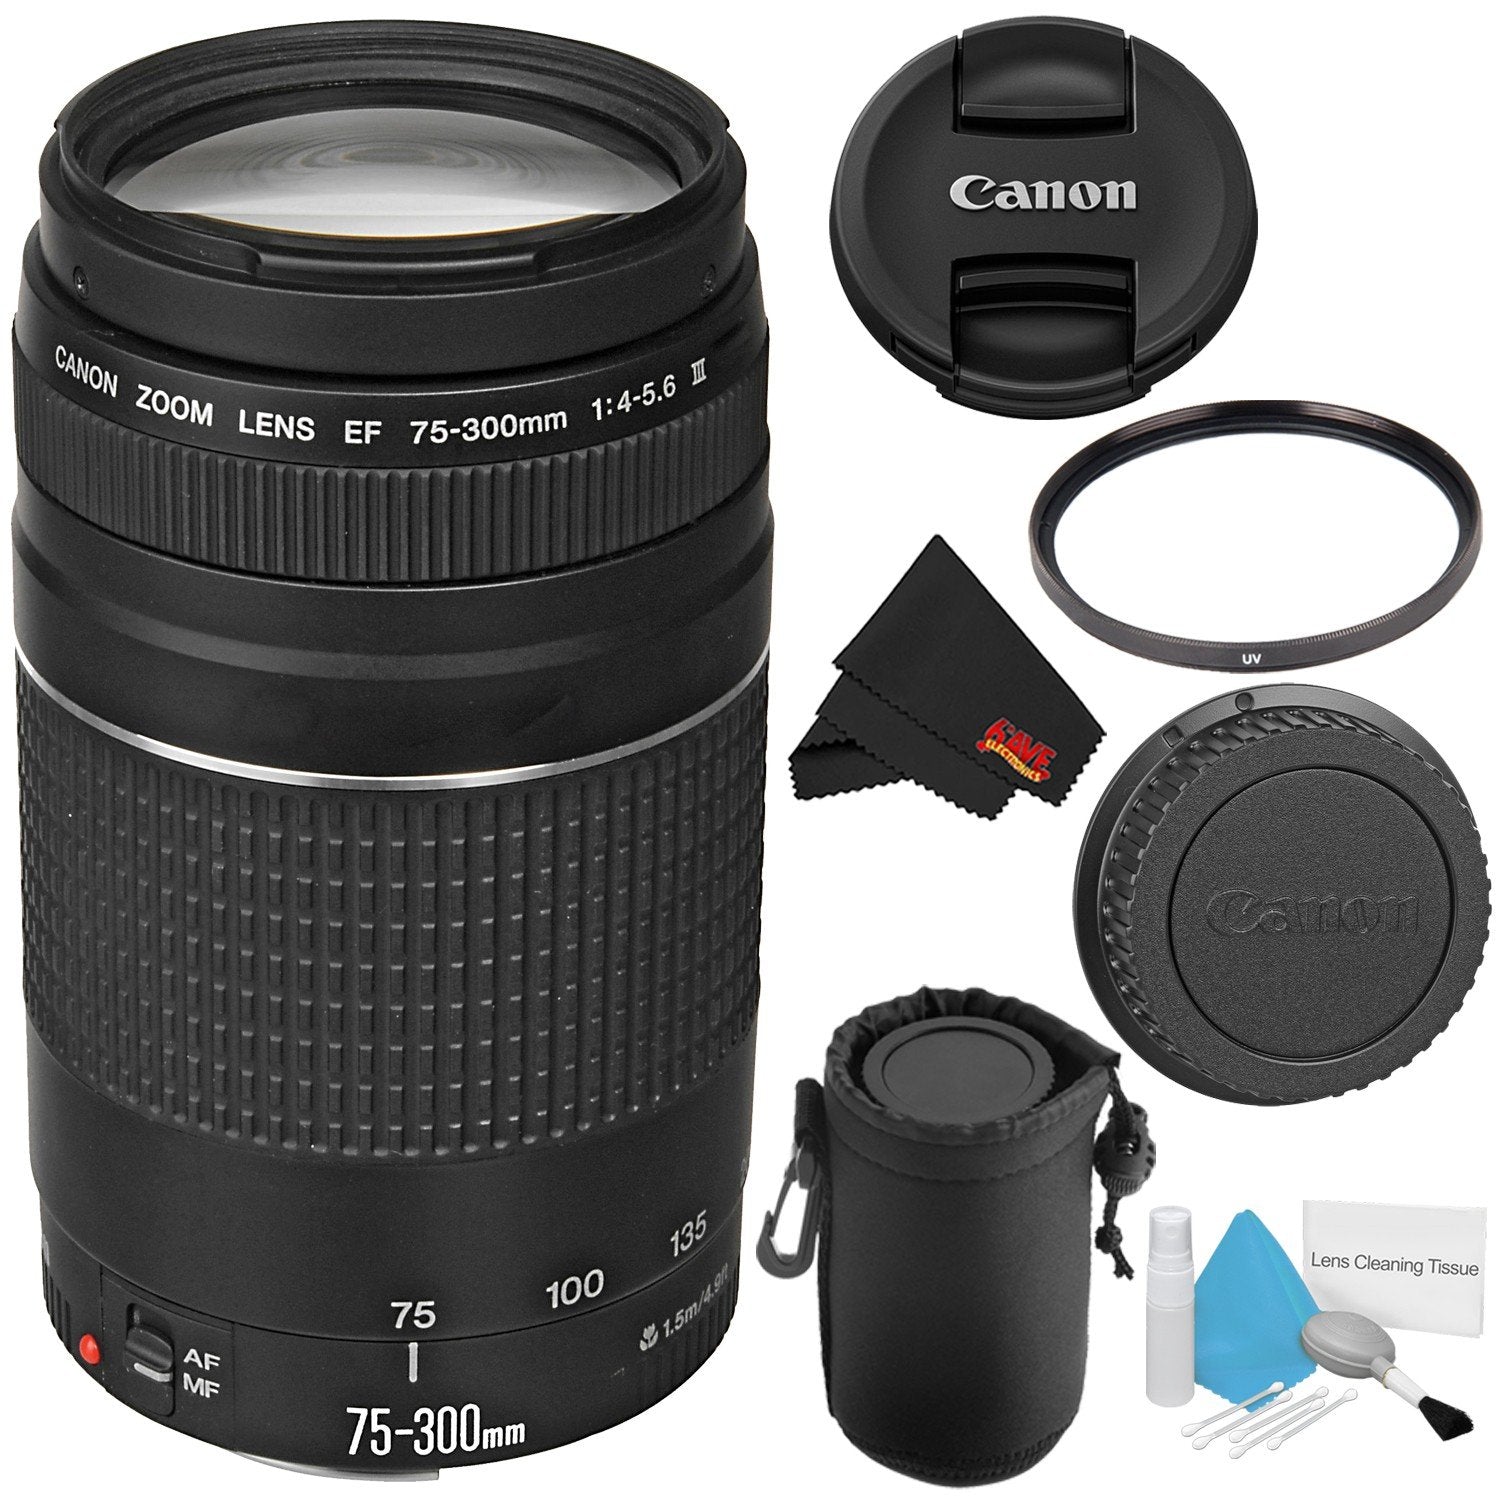 Canon EF 75-300mm f/4-5.6 III Telephoto Zoom Lens 6473A003 + Deluxe Lens Pouch + Deluxe Cleaning Kit + MicroFiber Cloth Bundle